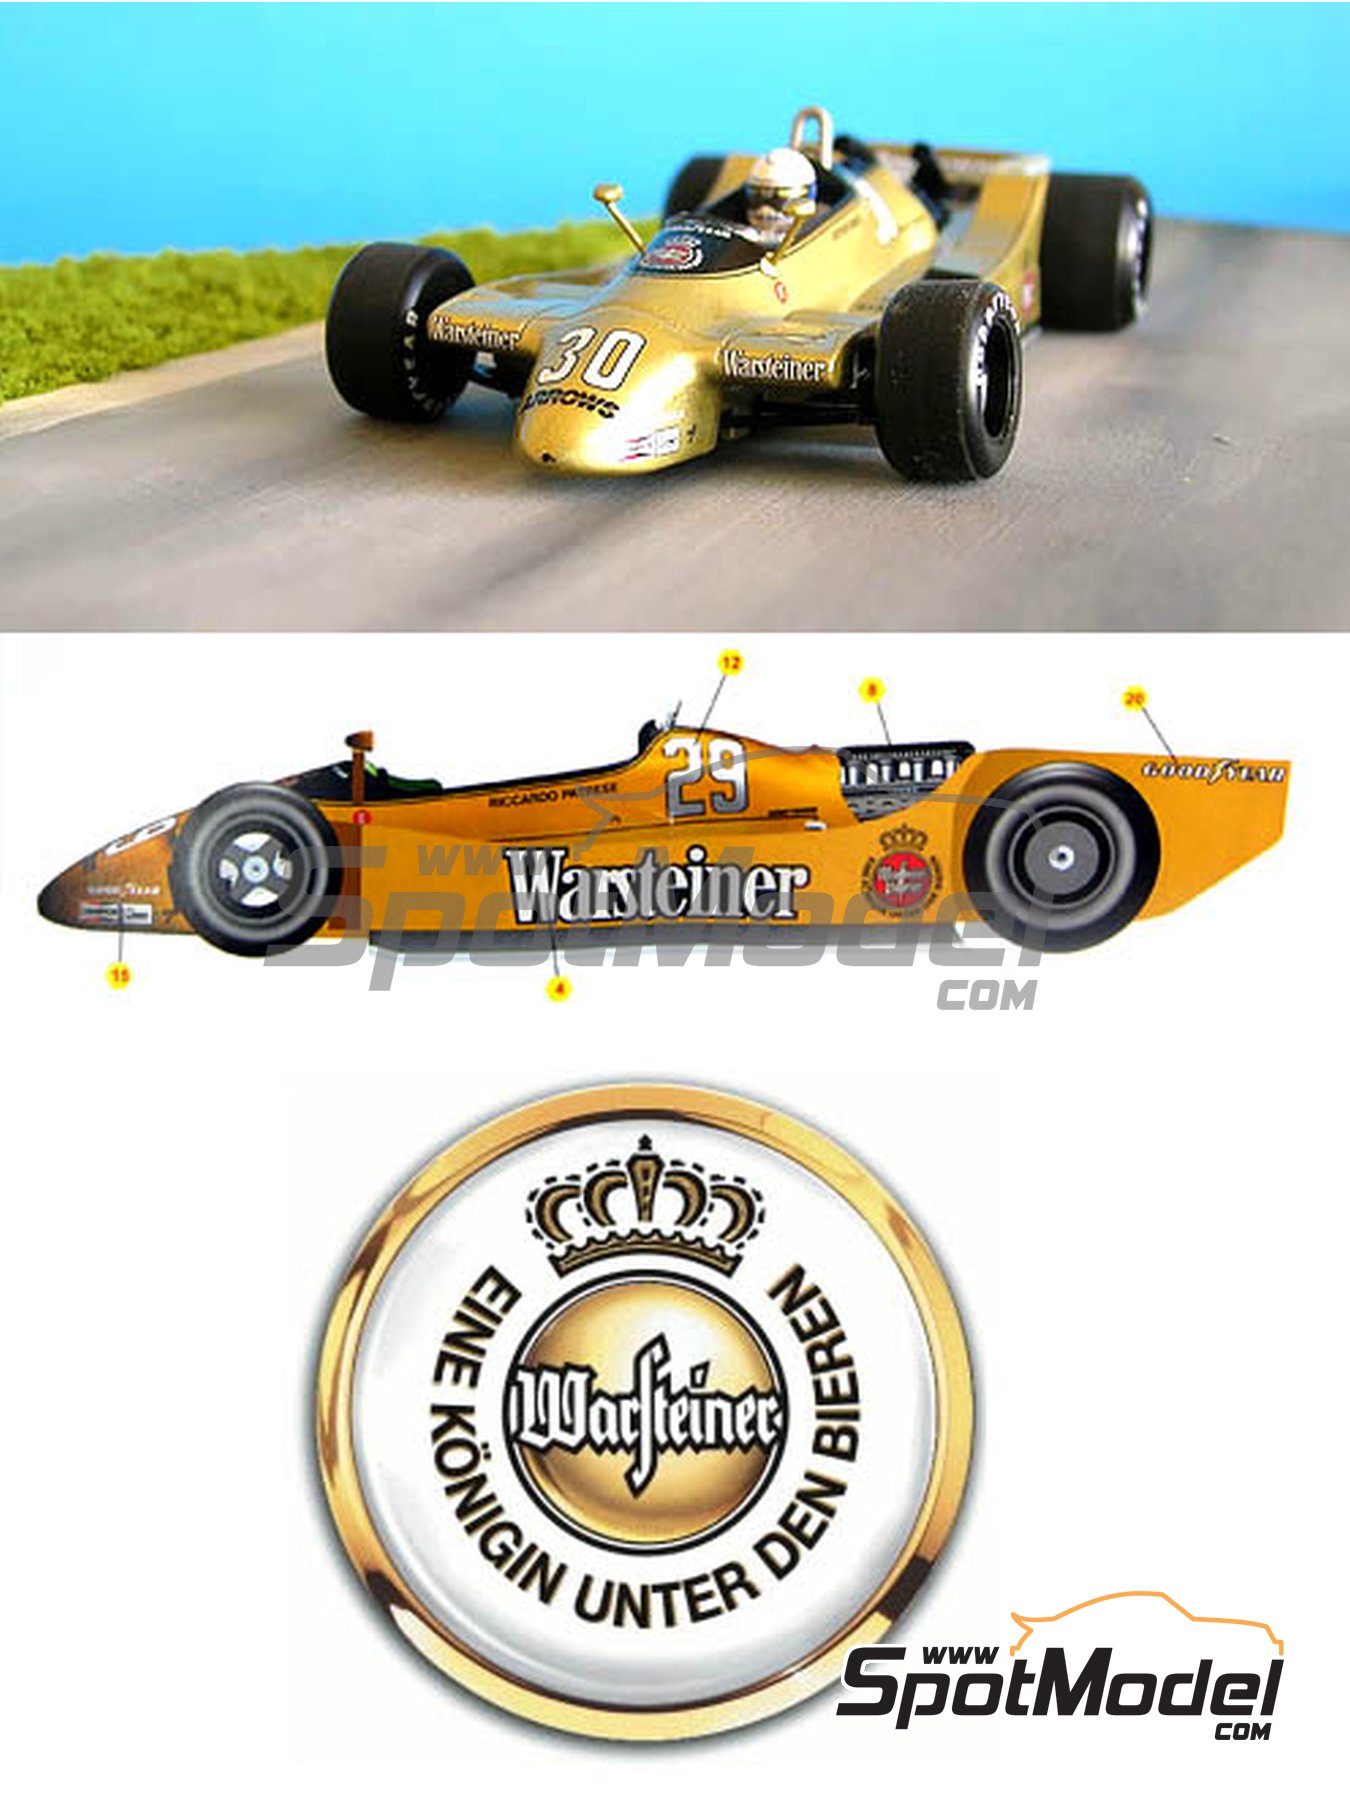 Arrows Ford A2 Arrows Grand Prix International Team sponsored by Warsteiner  - French Formula 1 Grand Prix 1979. Car scale model kit in 1/43 scale manu